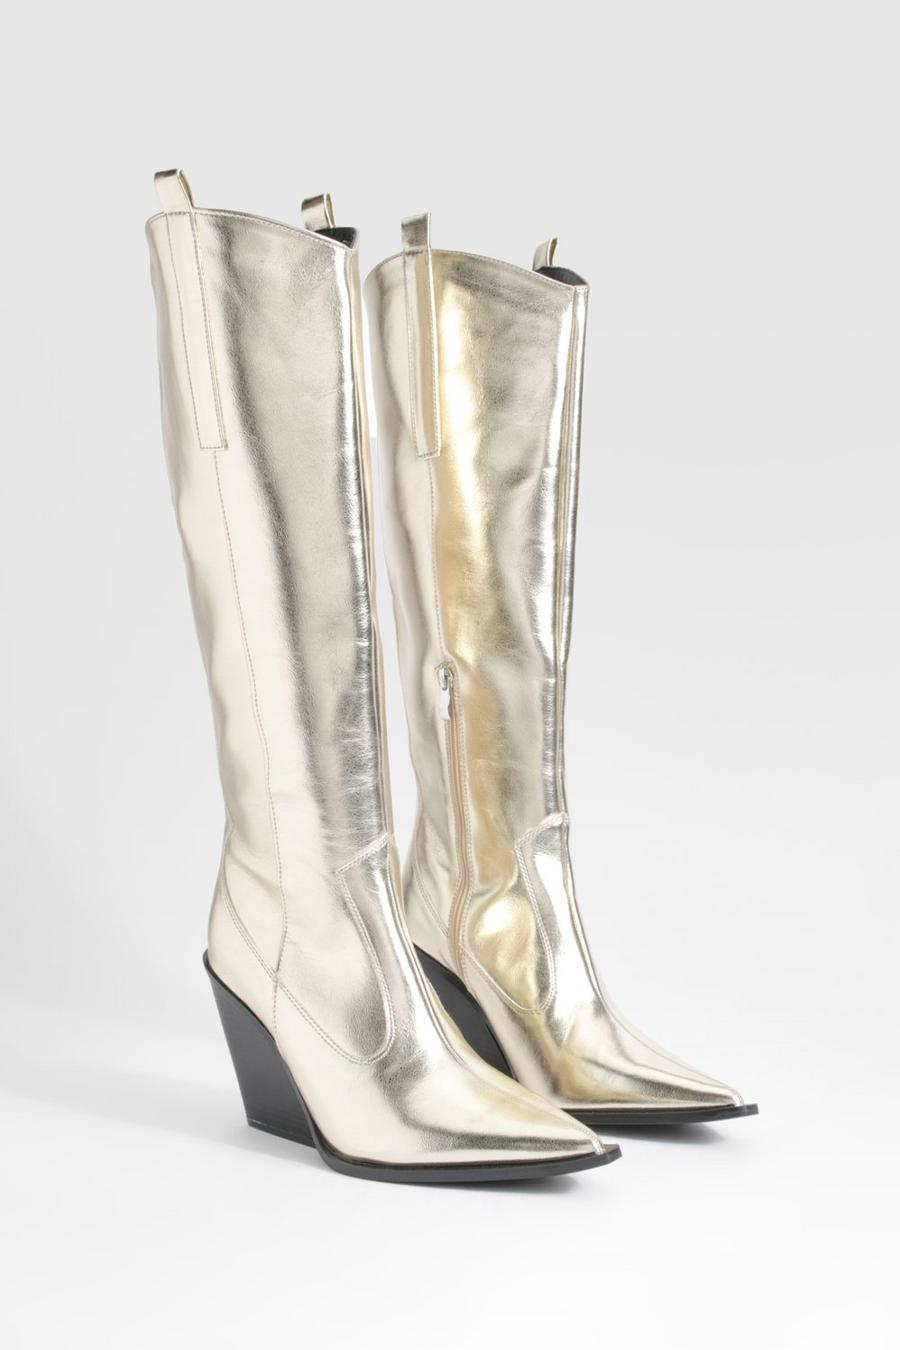 Gold metallic Wide Width Wedged Western Cowboy Boots